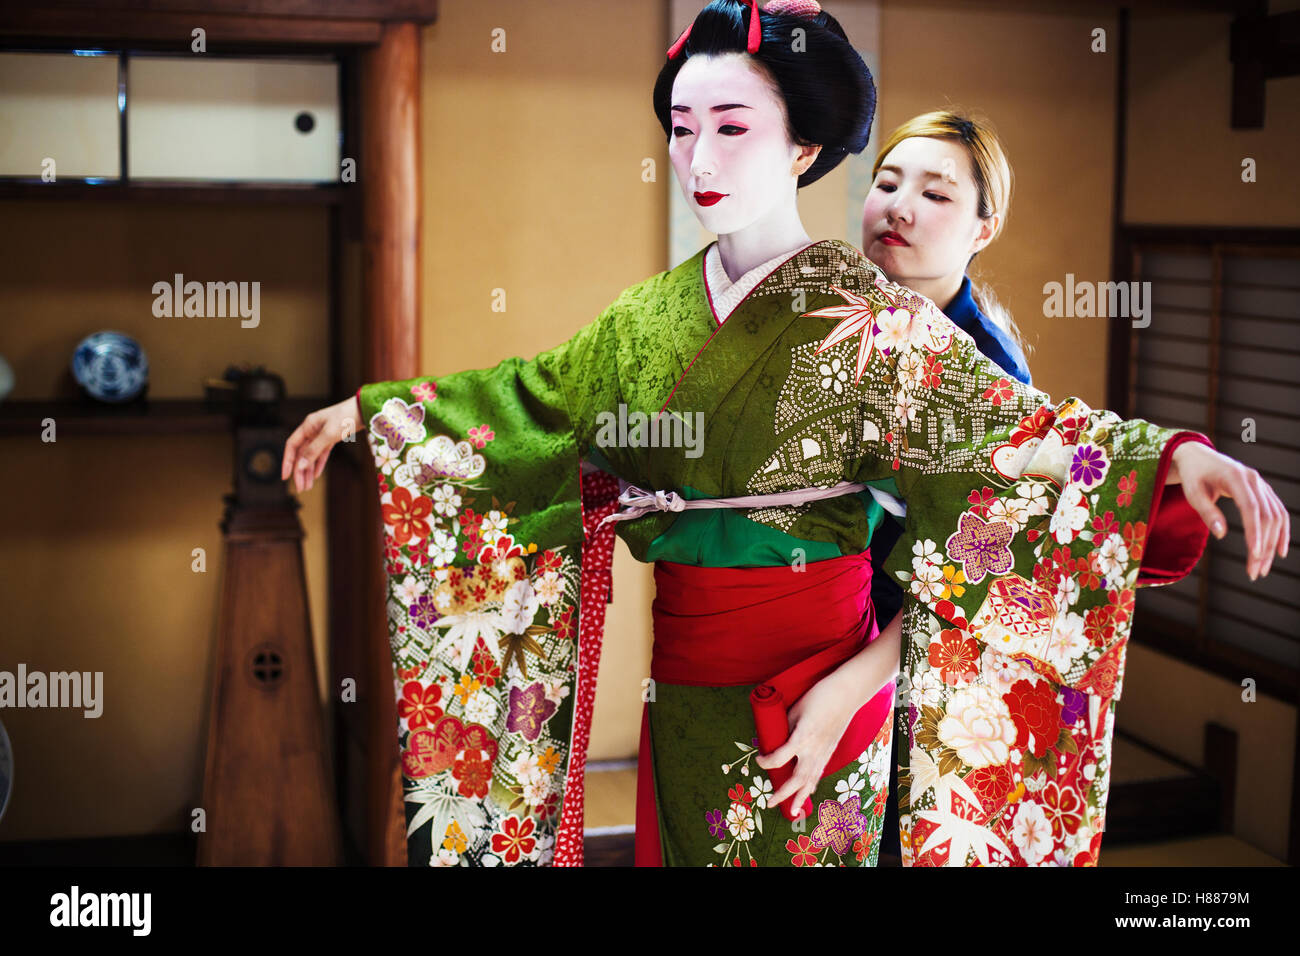 A woman being dressed in geisha style, wearing a kimono and obi, with an  elaborate hairstyle and floral hair clips Stock Photo - Alamy